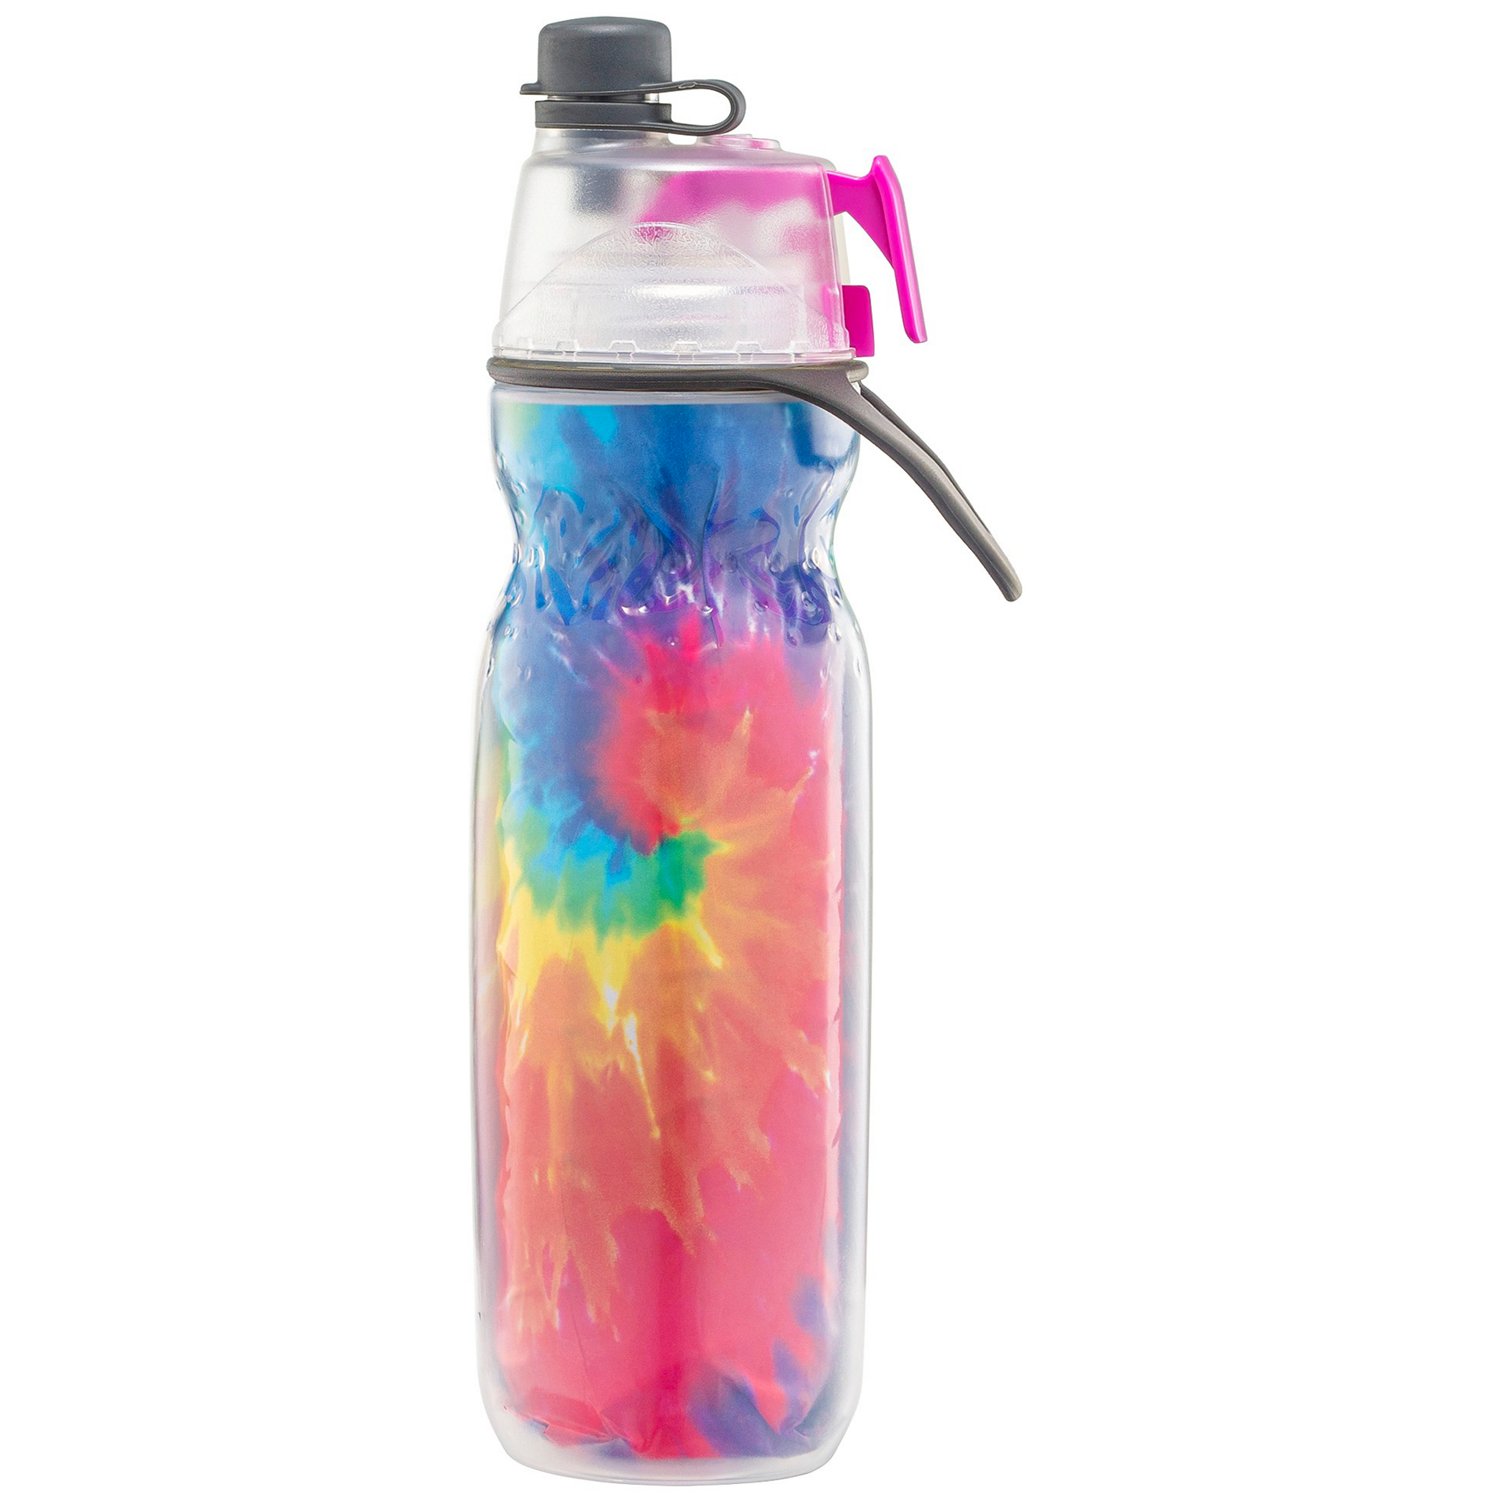 O2COOL Mist 'N Sip Misting Water Bottle 2-in-1 Mist And Sip